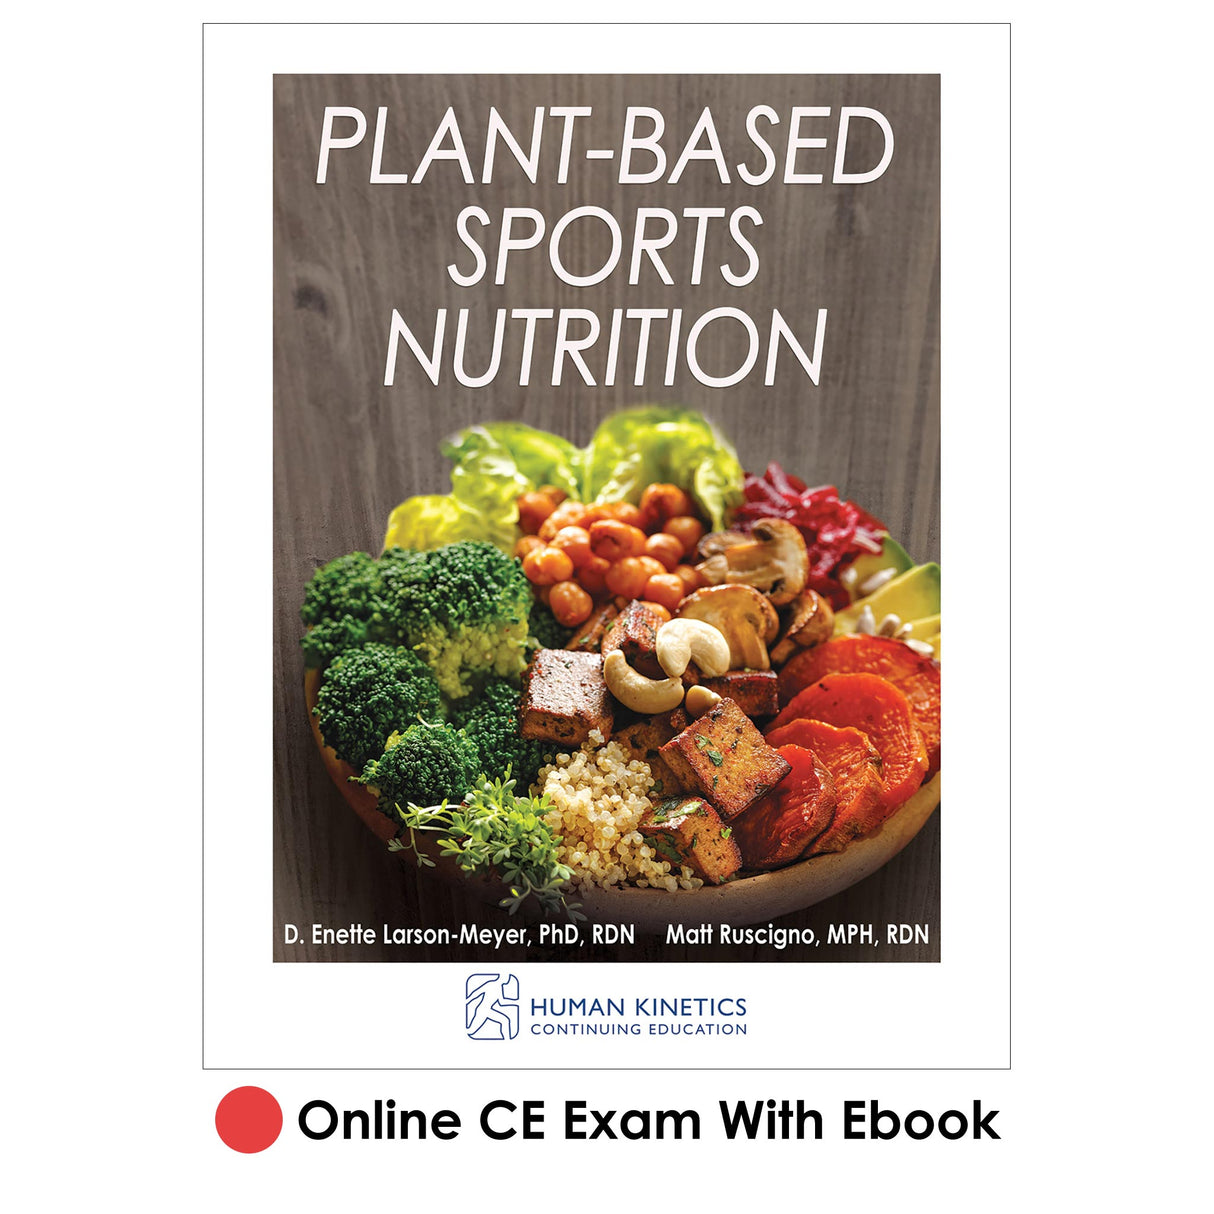 Plant-Based Sports Nutrition Online CE Exam With Ebook